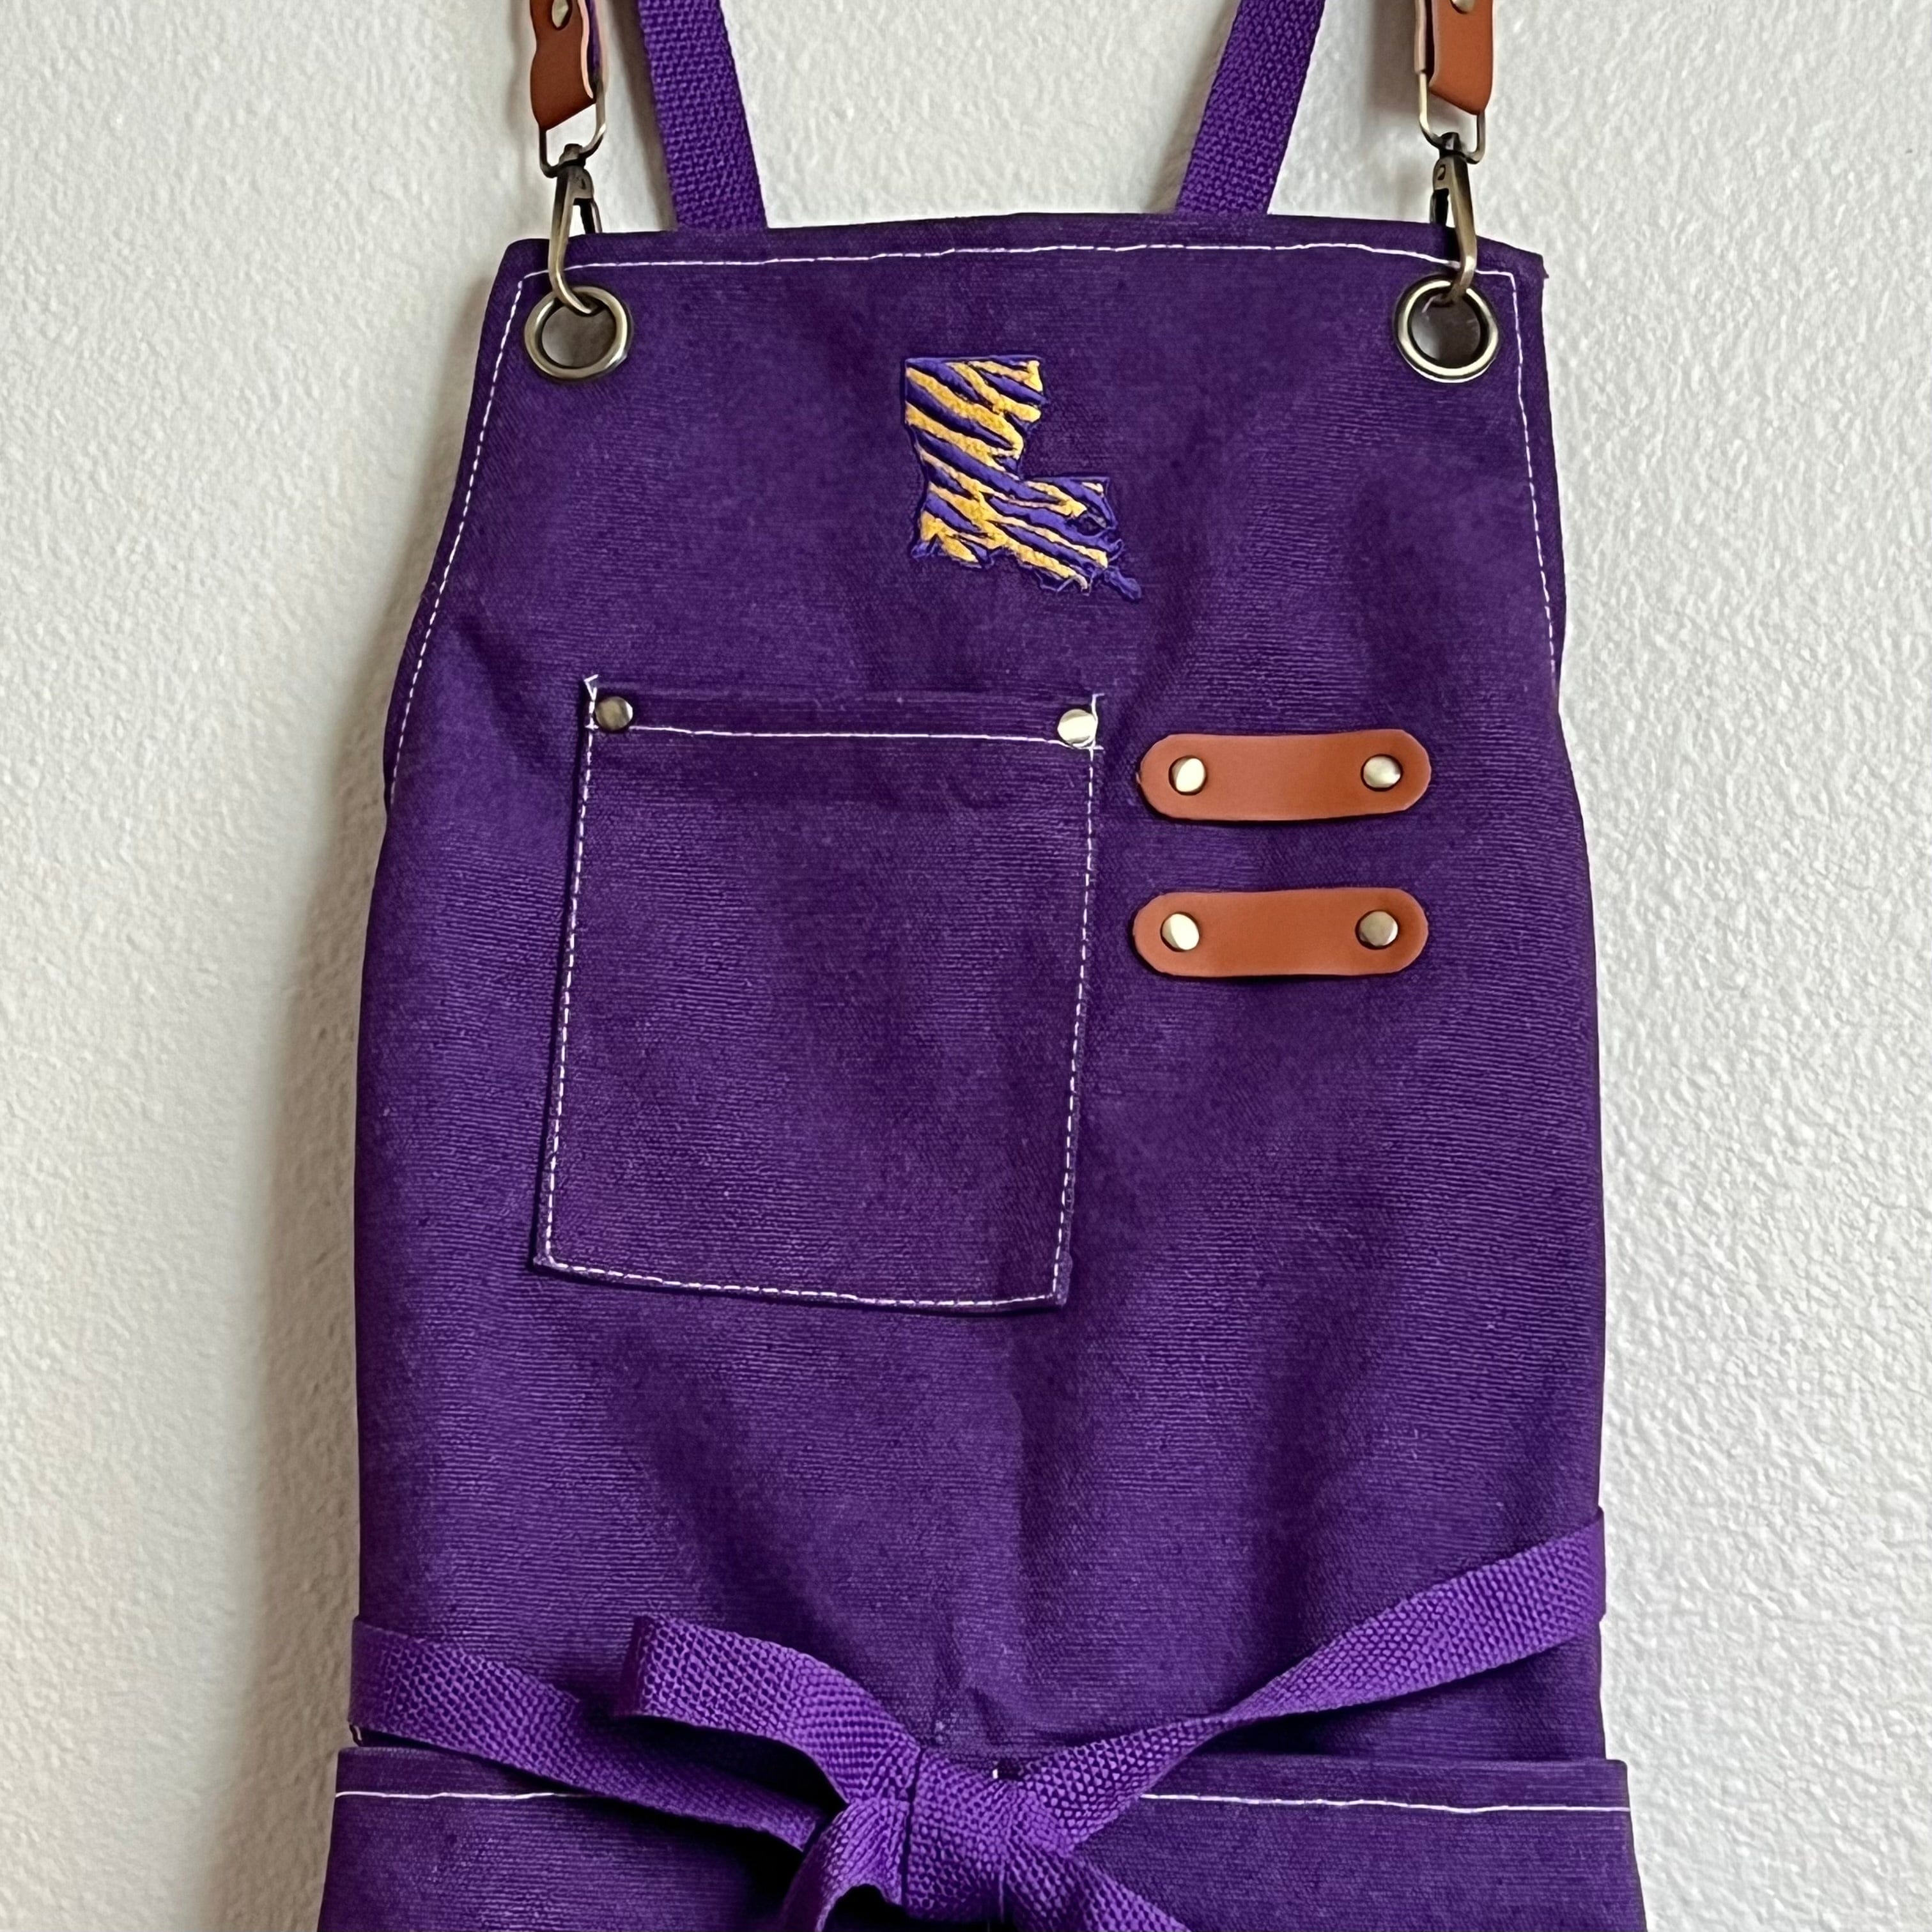 Whereable Art WHEREable Art Crossback Embroidered Canvas Apron - Little Miss Muffin Children & Home